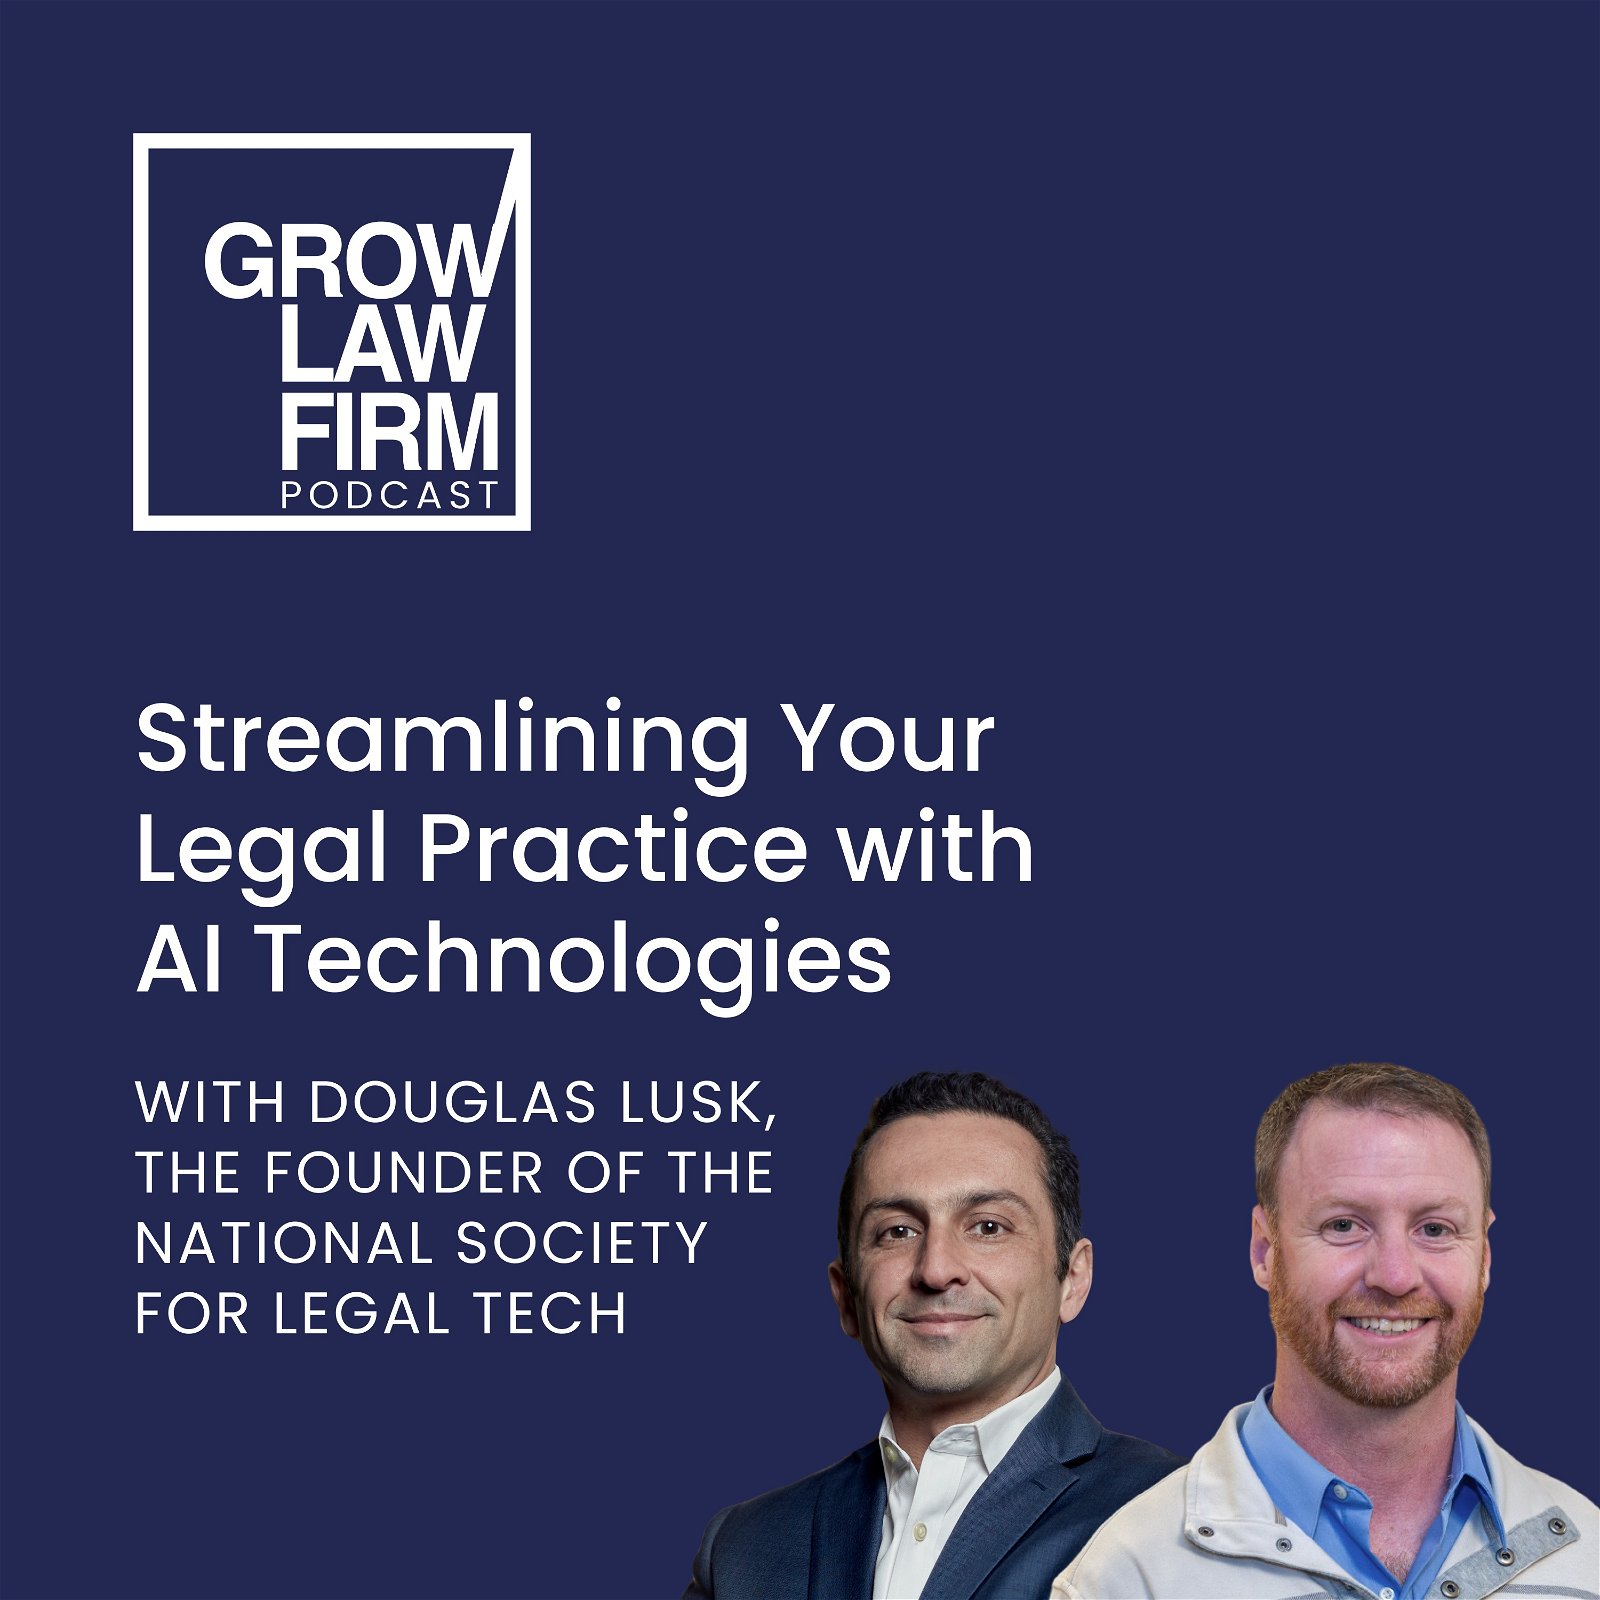 Streamlining Your Legal Practice with AI Technologies with Douglas Lusk, the Founder of the National Society for Legal Tech